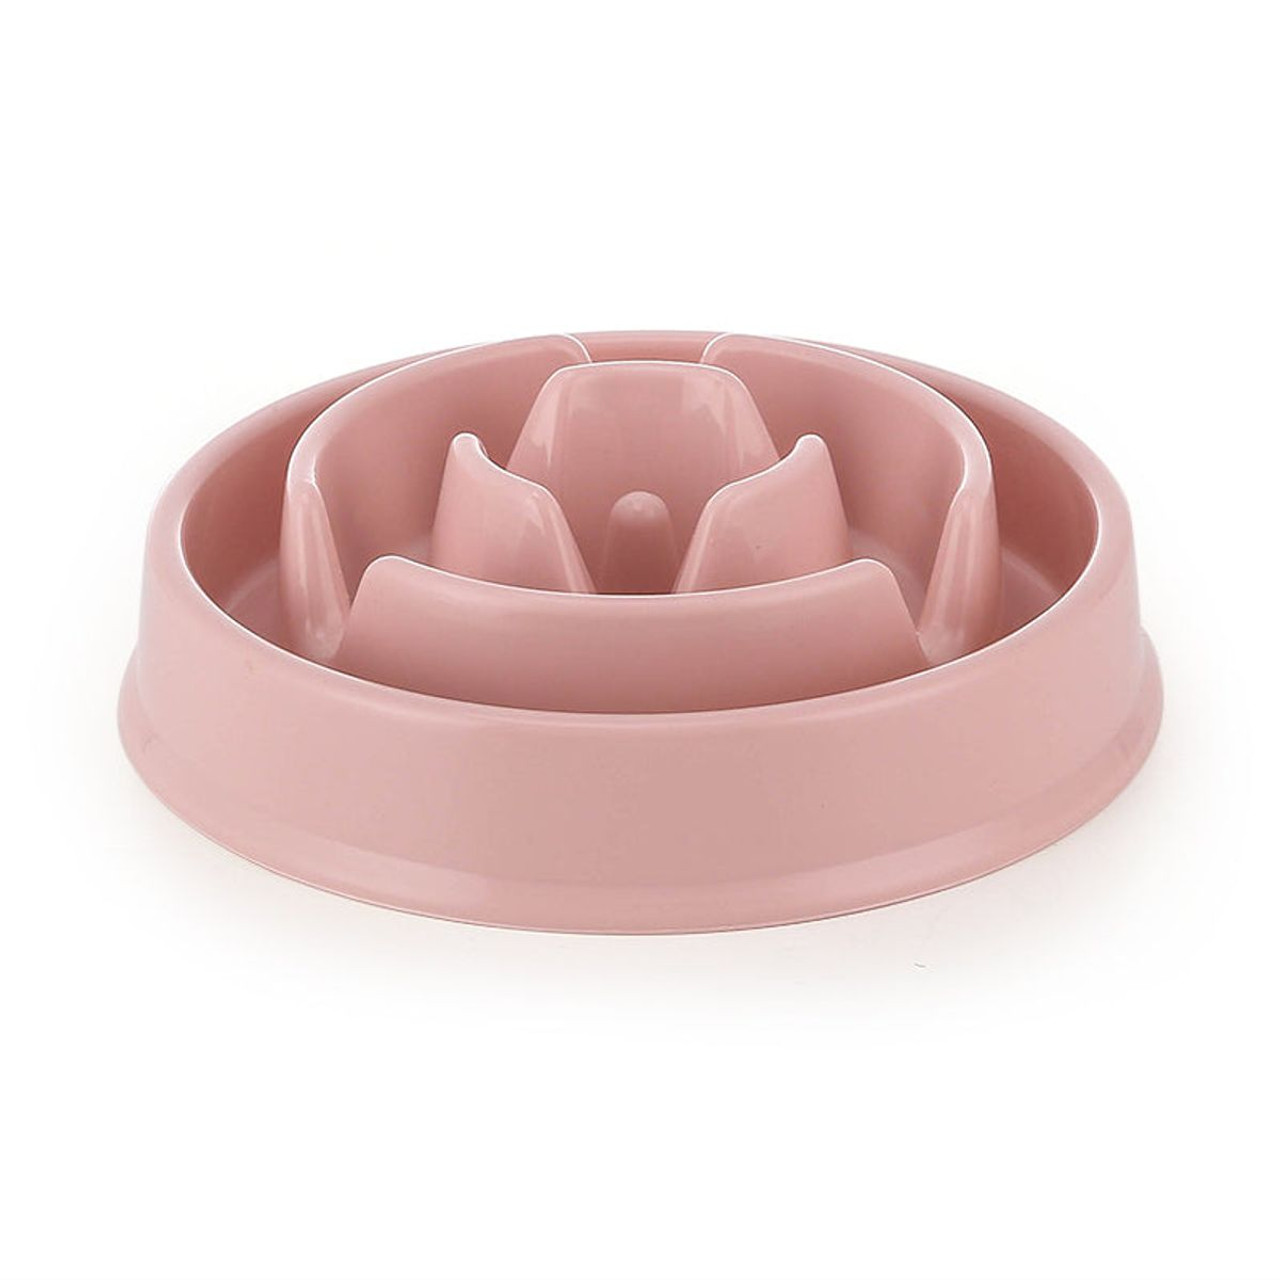 Healthy Slow Feeder Pet Bowl product image